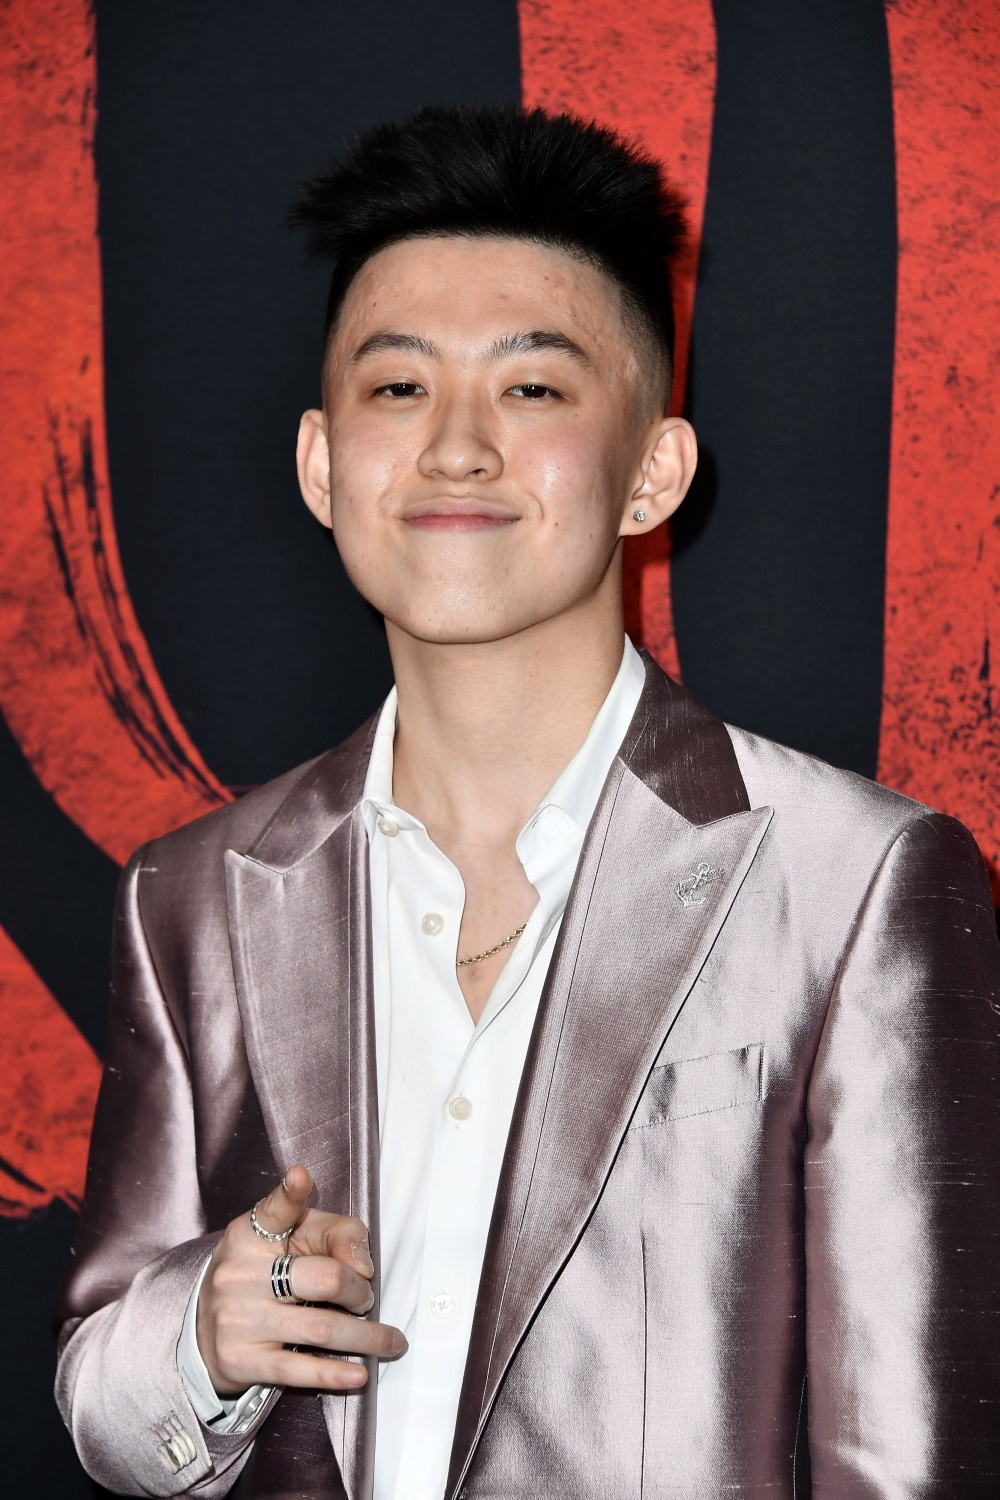 Rich Brian "Don't Care" for Fake Friends and Negative Thoughts in New Single